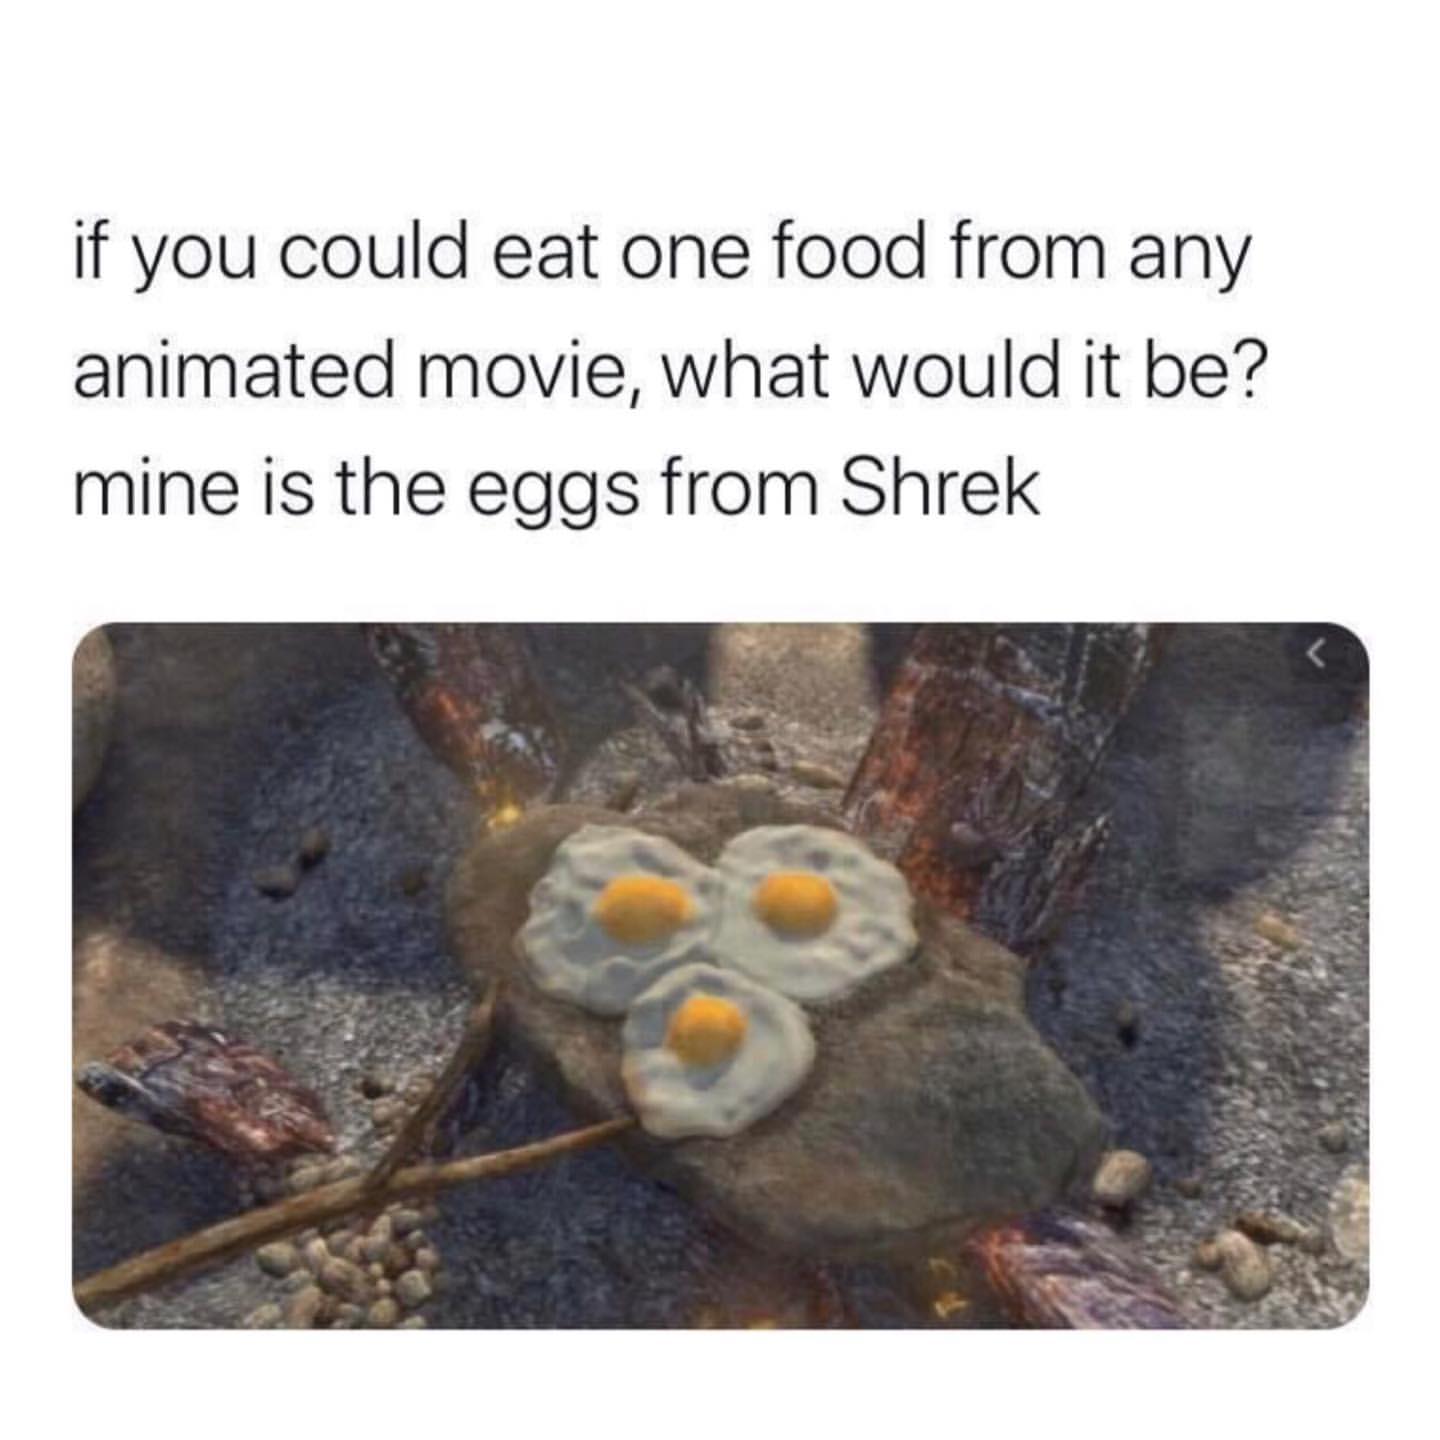 If you could eat one food from any animated movie, what would it be? Mine is the eggs from Shrek.